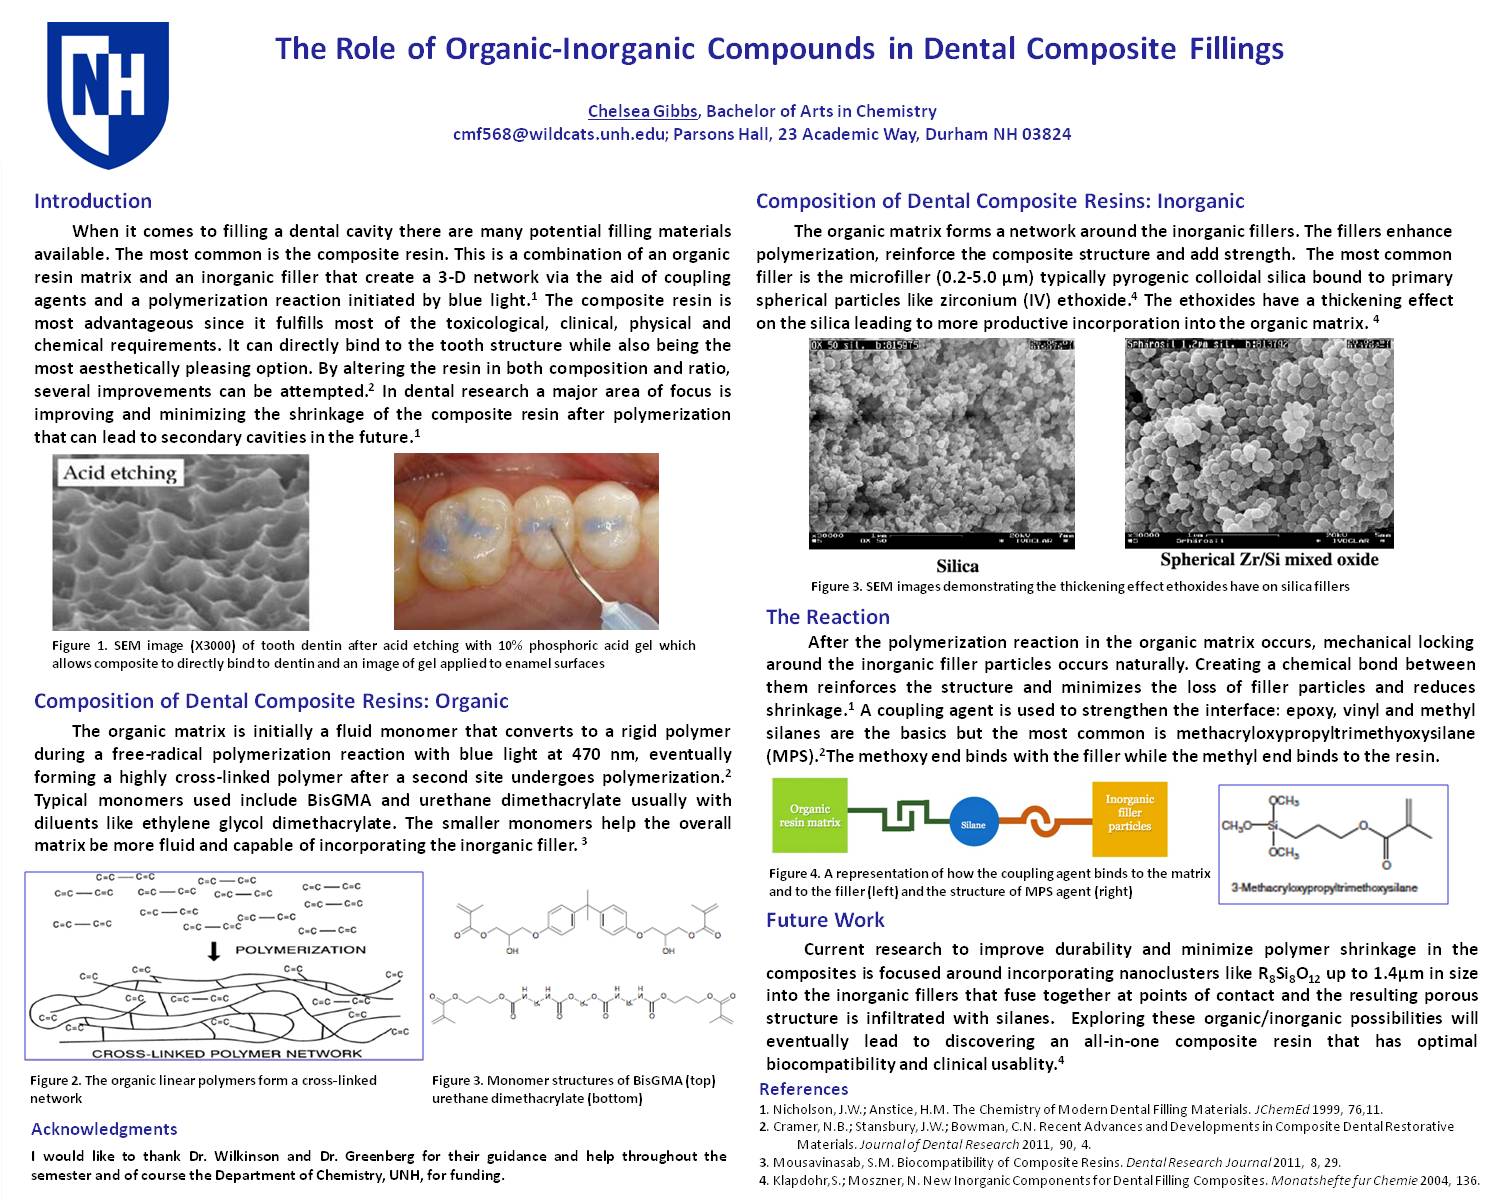 The Role Of Organic-Inorganic Compounds In Dental Composite Fillings by cmf568